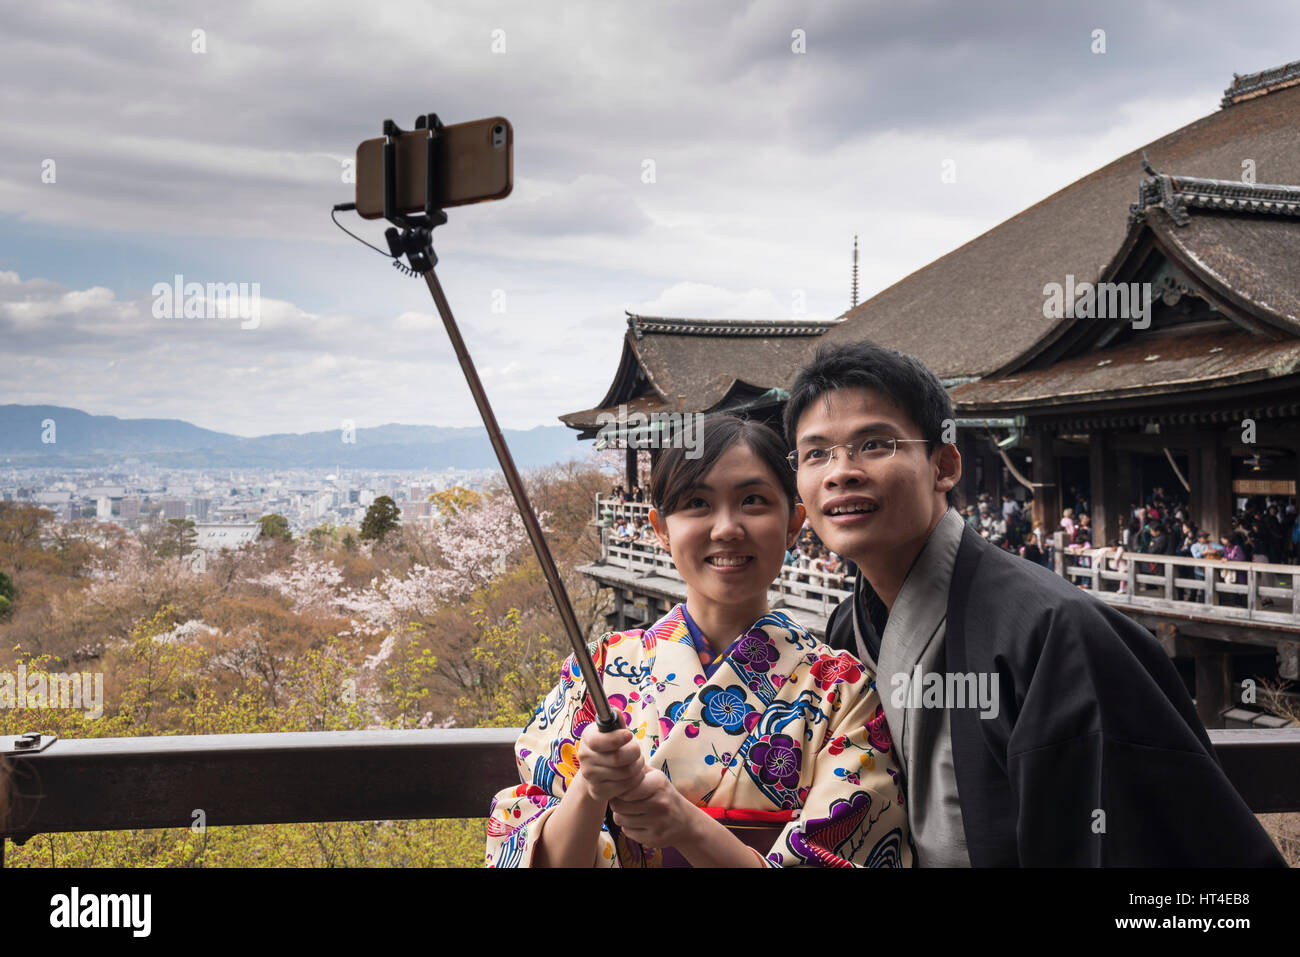 A young couple tourists in Kimono, Japanese traditional costume, taking selfie with selfie stick in Kiyomizu dera, Buddhist Temple in Kyoto, Japan Stock Photo